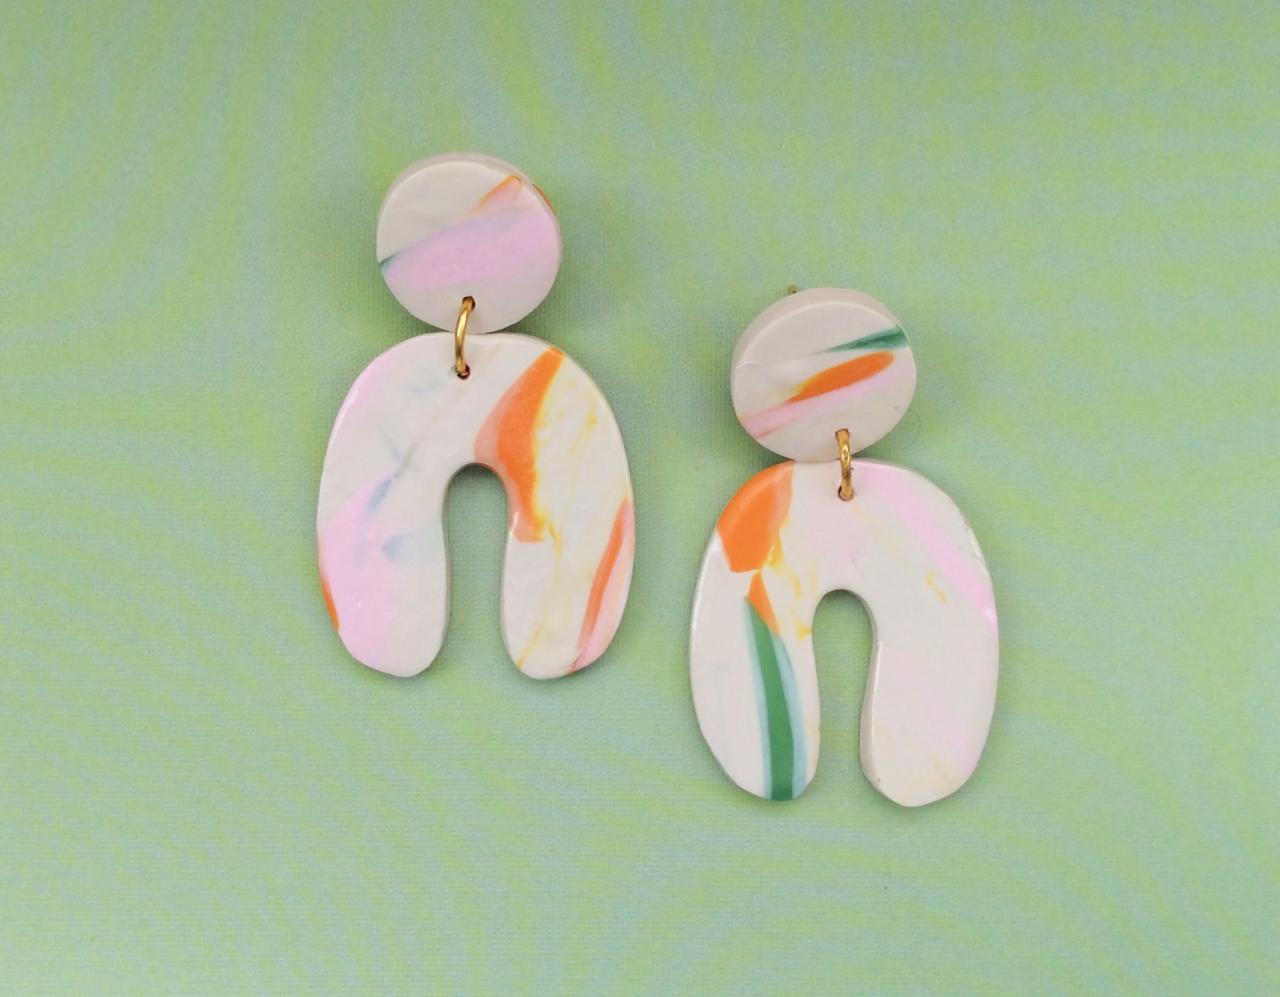 Abstract U With Circle Polymer Clay Drop Earrings Polymer Clay Statement Earrings | Modern Minimalist Polymer Clay Dangle Earrings